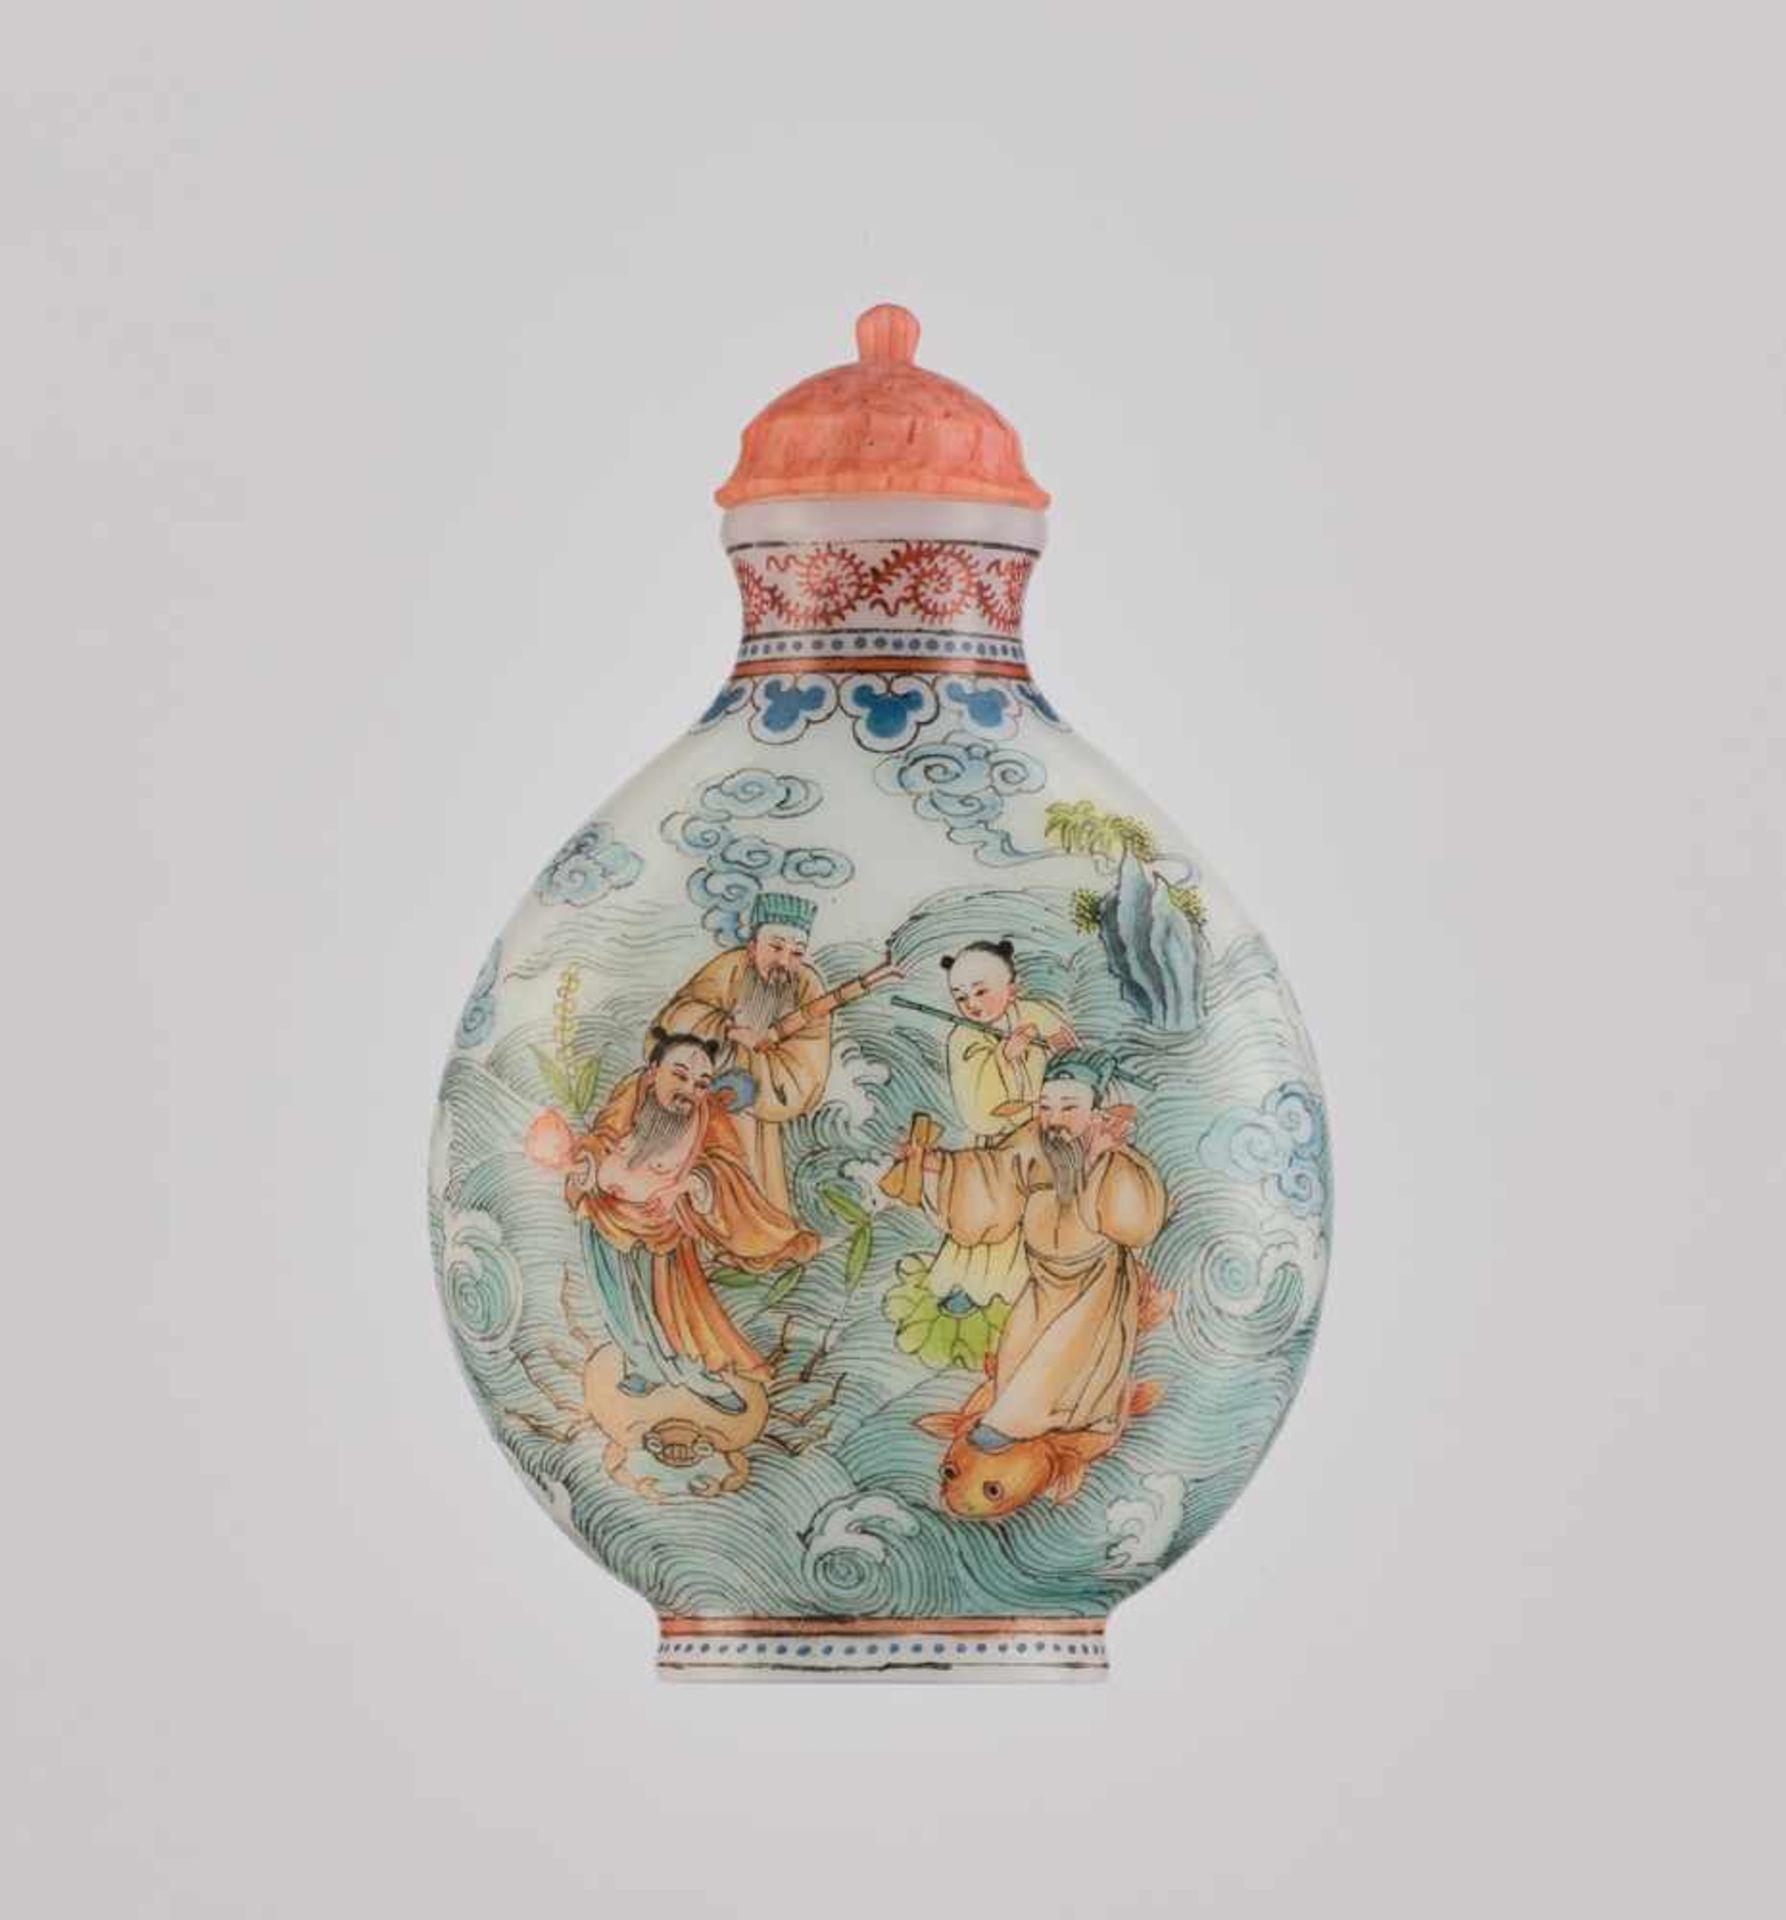 AN ENAMELED 'BAXIAN' GLASS SNUFF BOTTLE, 20th CENTURY Opaque white glass with delicately painted